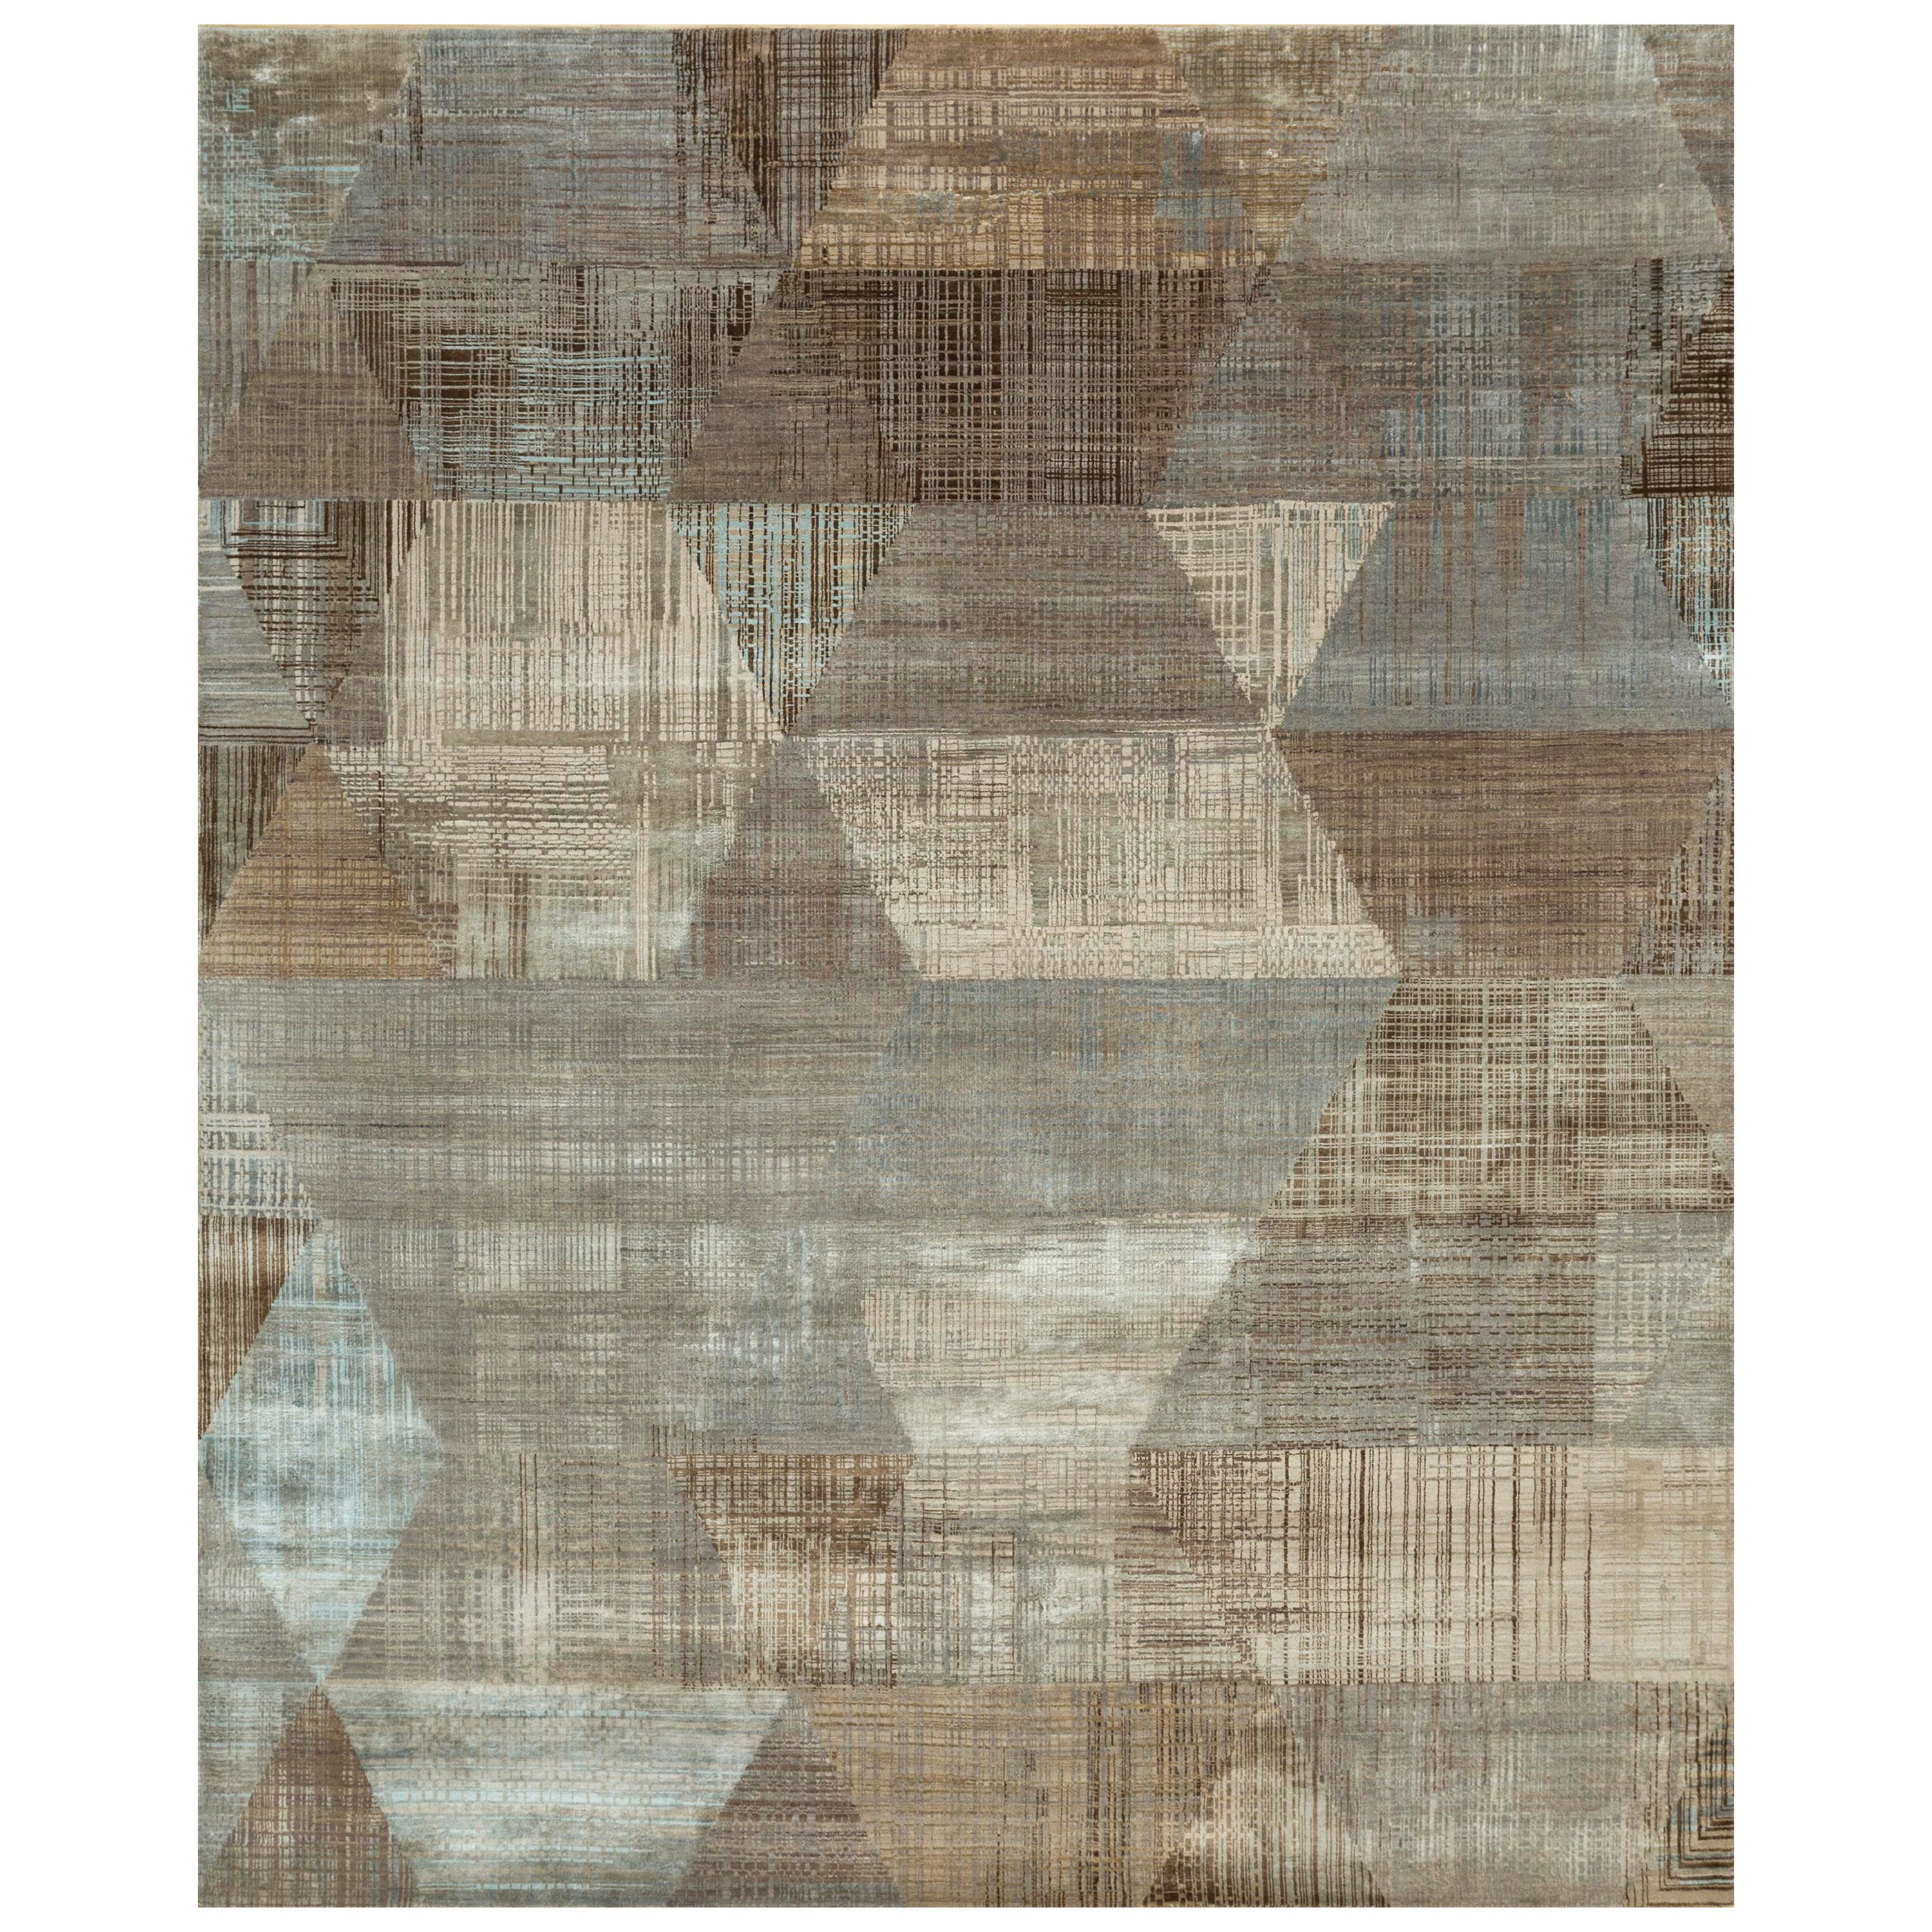 Ashen Whispers Ashwood Antique White 195X295 cm Hand-Knotted Rug